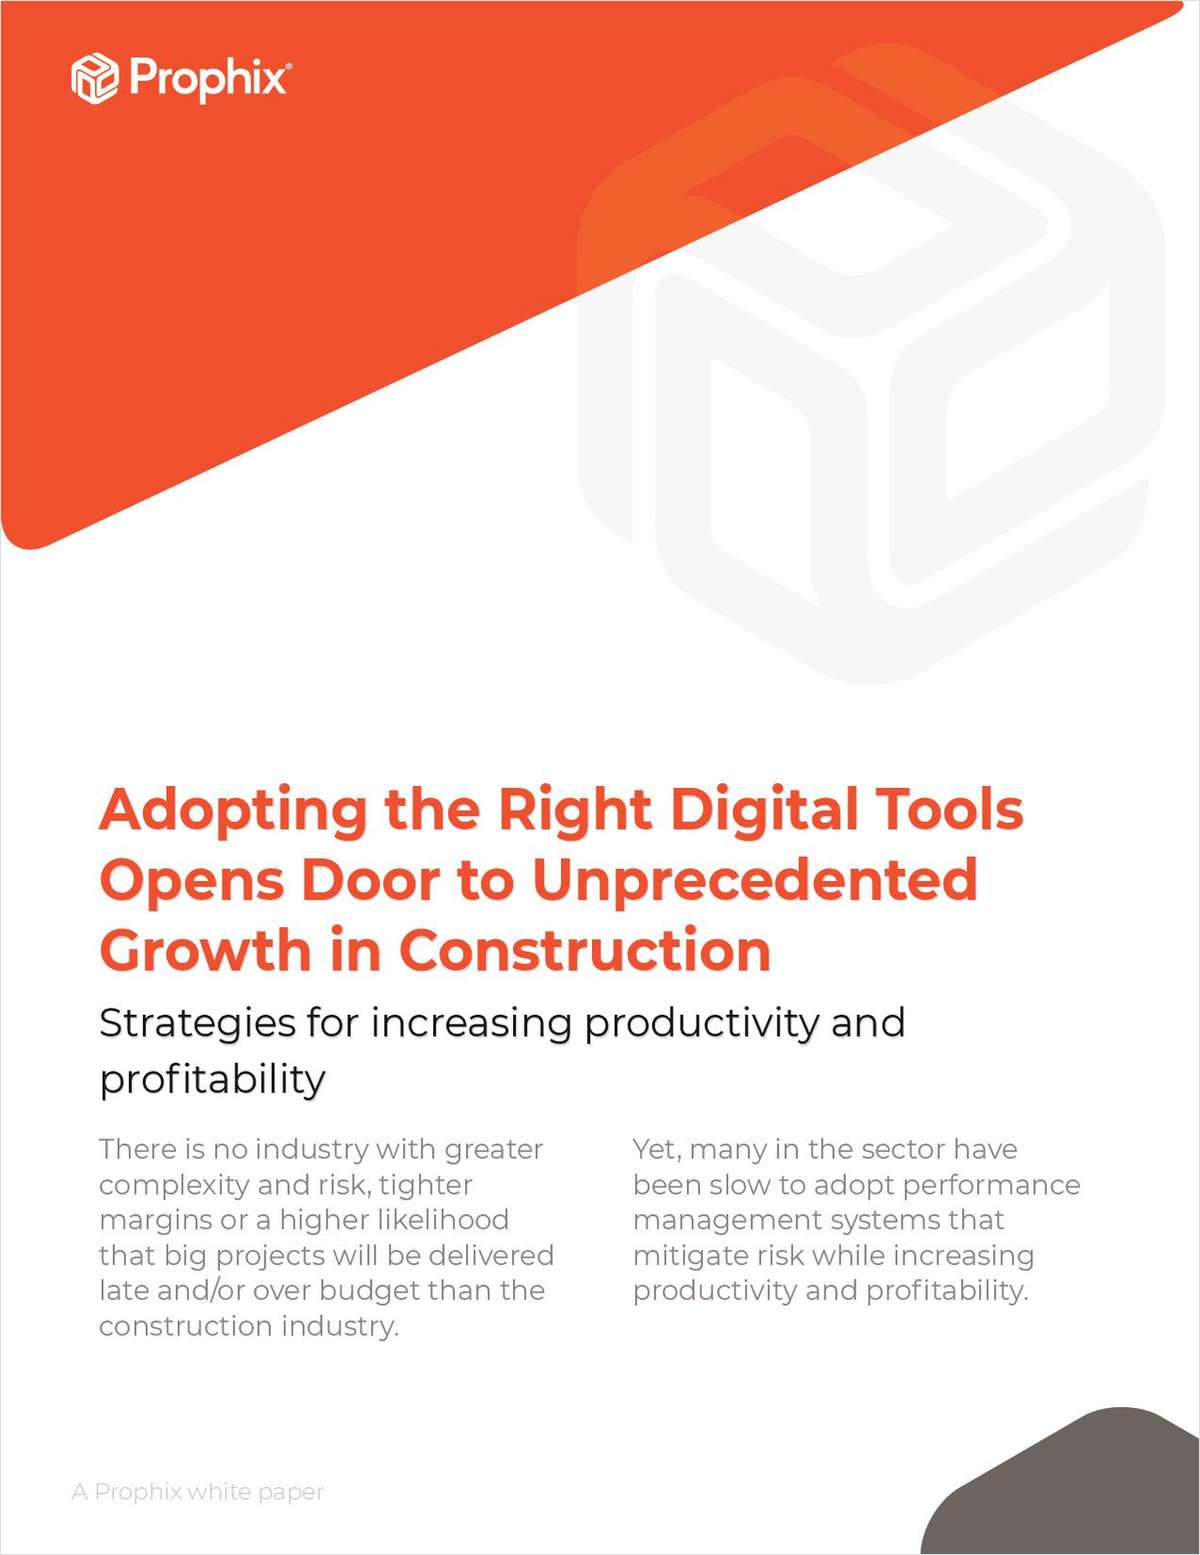 Adopting the Right Digital Tools Opens Door to Unprecedented Growth in Construction